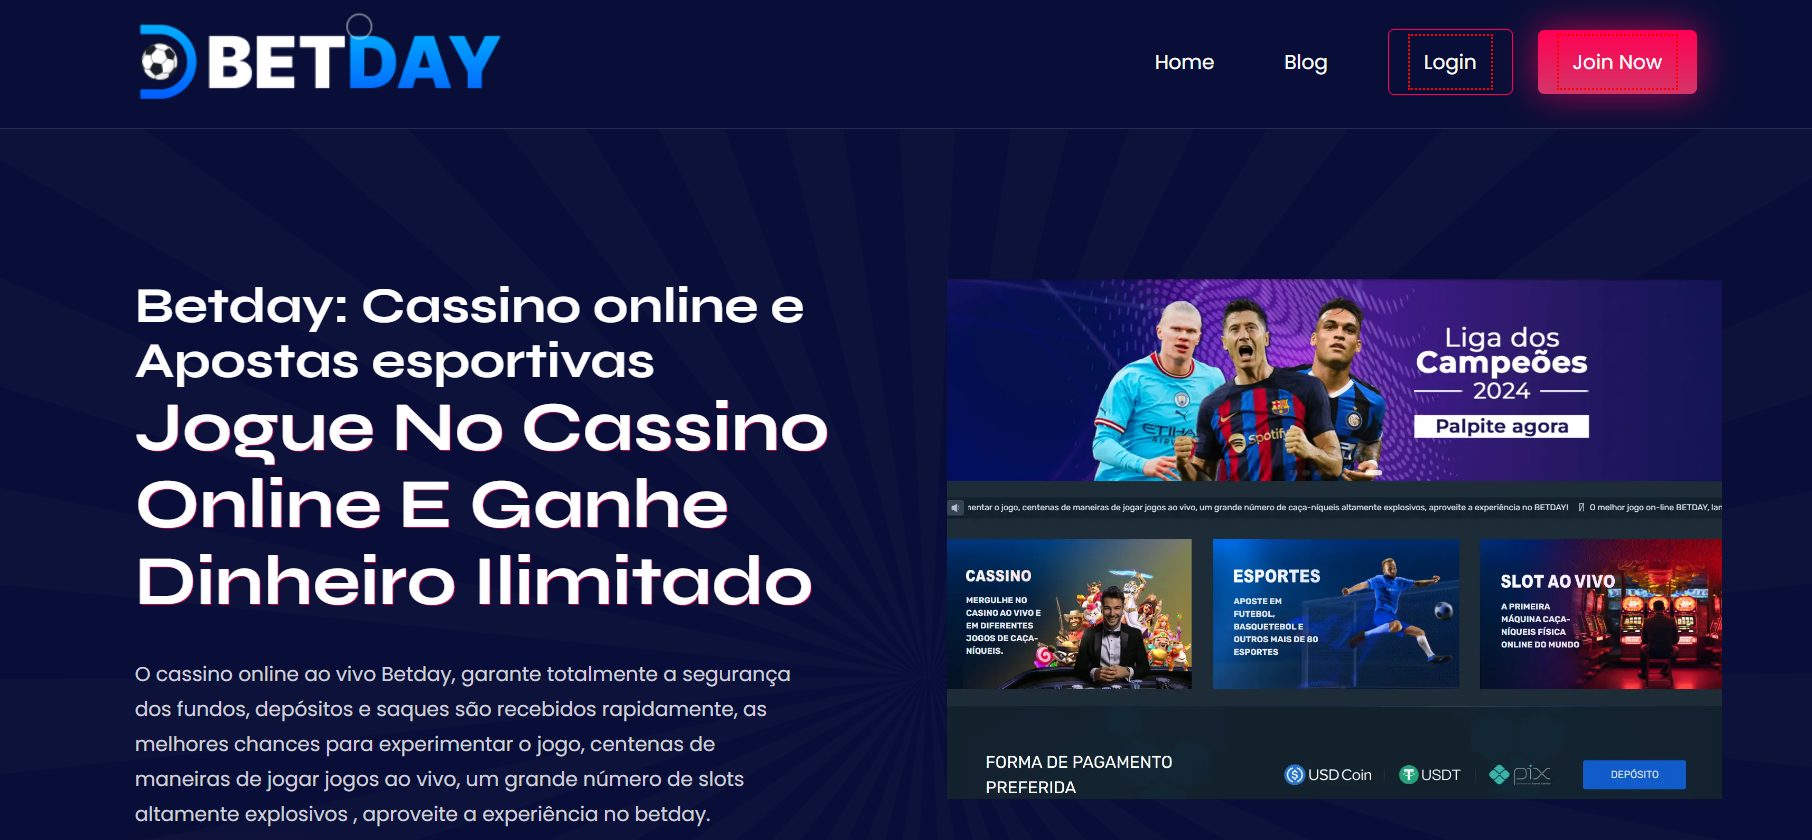 Betday Casino Online: An In-Depth Look At Table Games